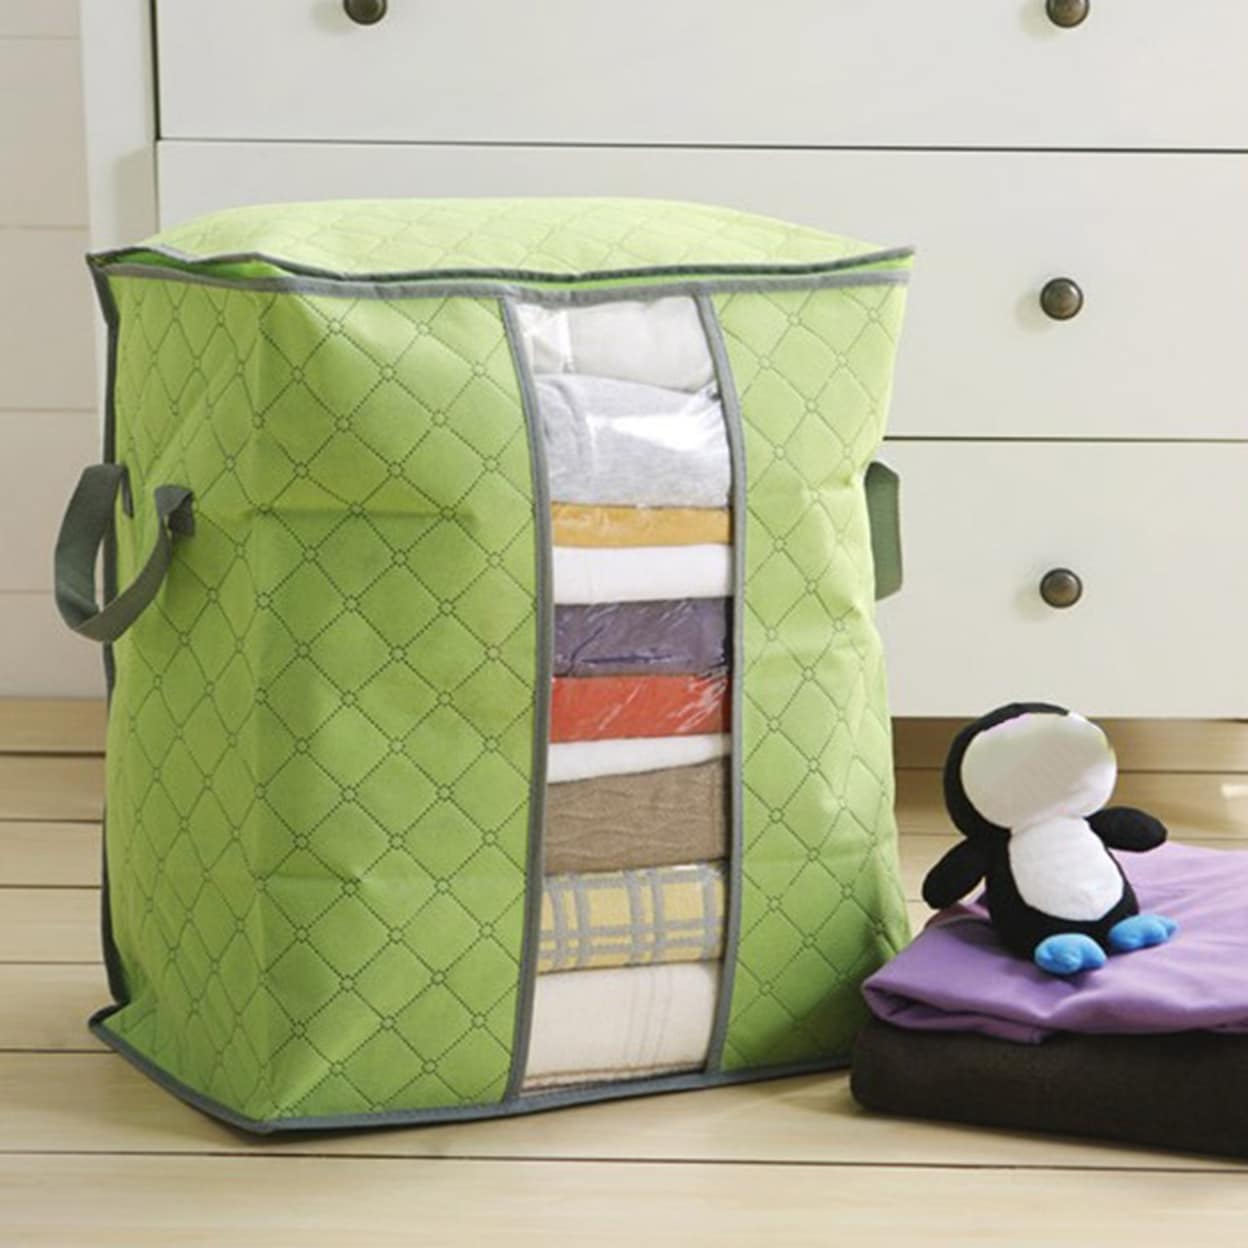 https://ak1.ostkcdn.com/images/products/is/images/direct/e704e80a3a1a5d2eaf0e7d6166697f9594509375/Dirt-Proof-Quilt-Storage-Bag-With-Zipper-Non-Woven-Fabric-Tear-Resistant-Blanket-Storage-Bag-For-Sweaters.jpg